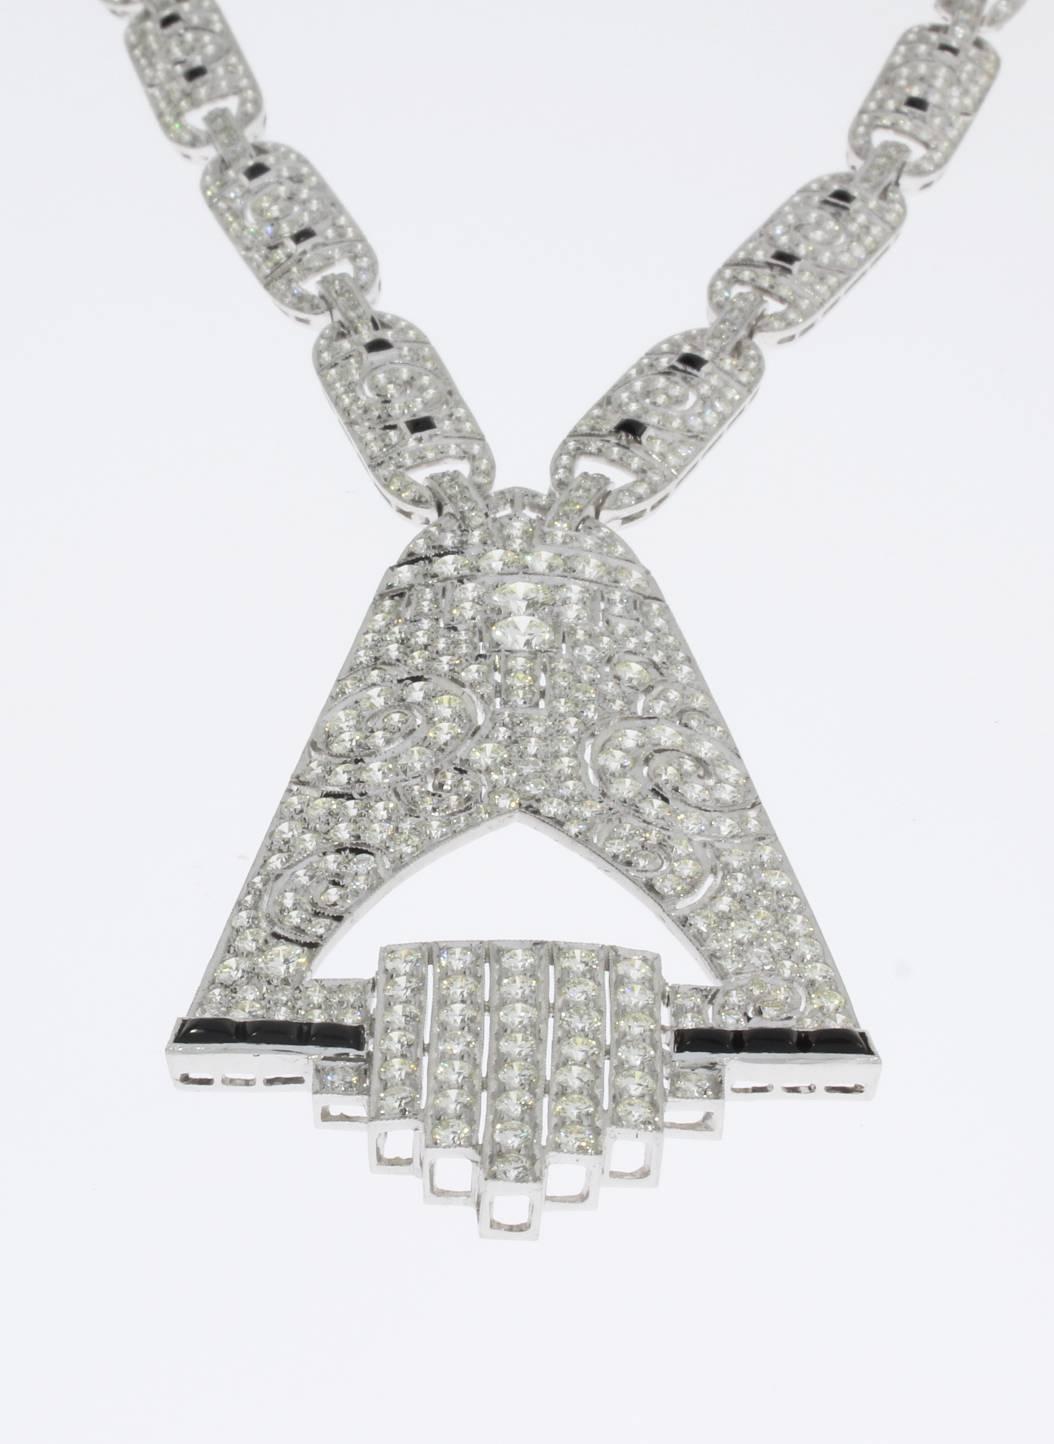 Circa 1970-1975. Composed as pavé-set diamond neckchain with shield-shaped pavé diamond pendant. Diamonds with a total weight of 18,06 carat. Clarity VS1, Color G. Accented by 51 onyx. Mounted in 18 K white gold. Millegrain setting. Total weight: